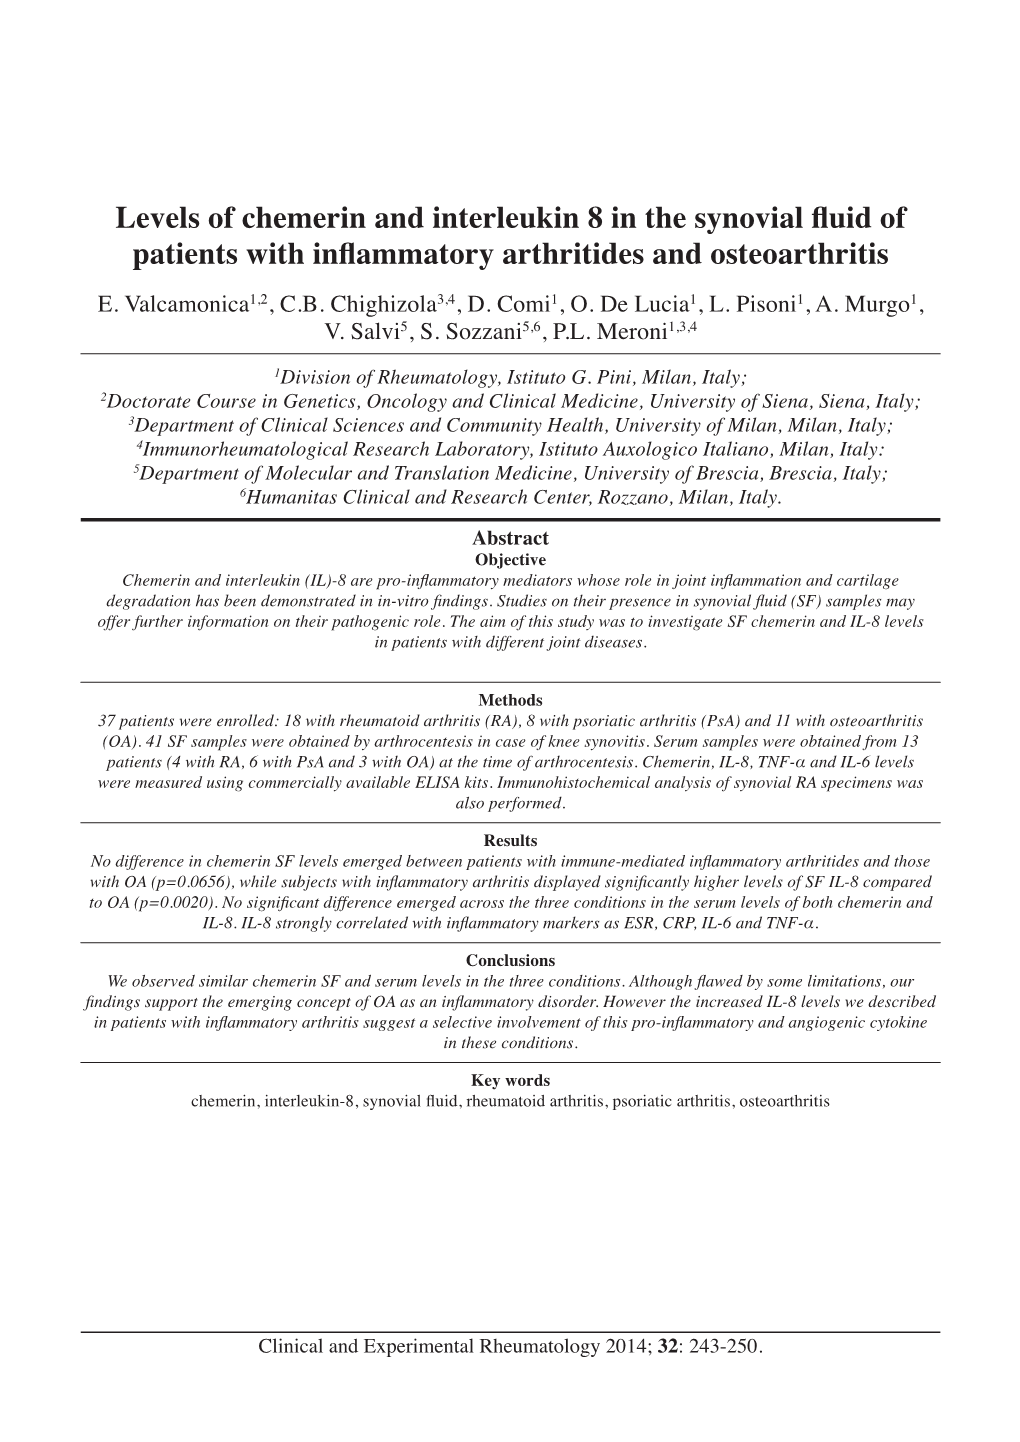 Levels of Chemerin and Interleukin 8 in the Synovial Fluid of Patients with Inflammatory Arthritides and Osteoarthritis E